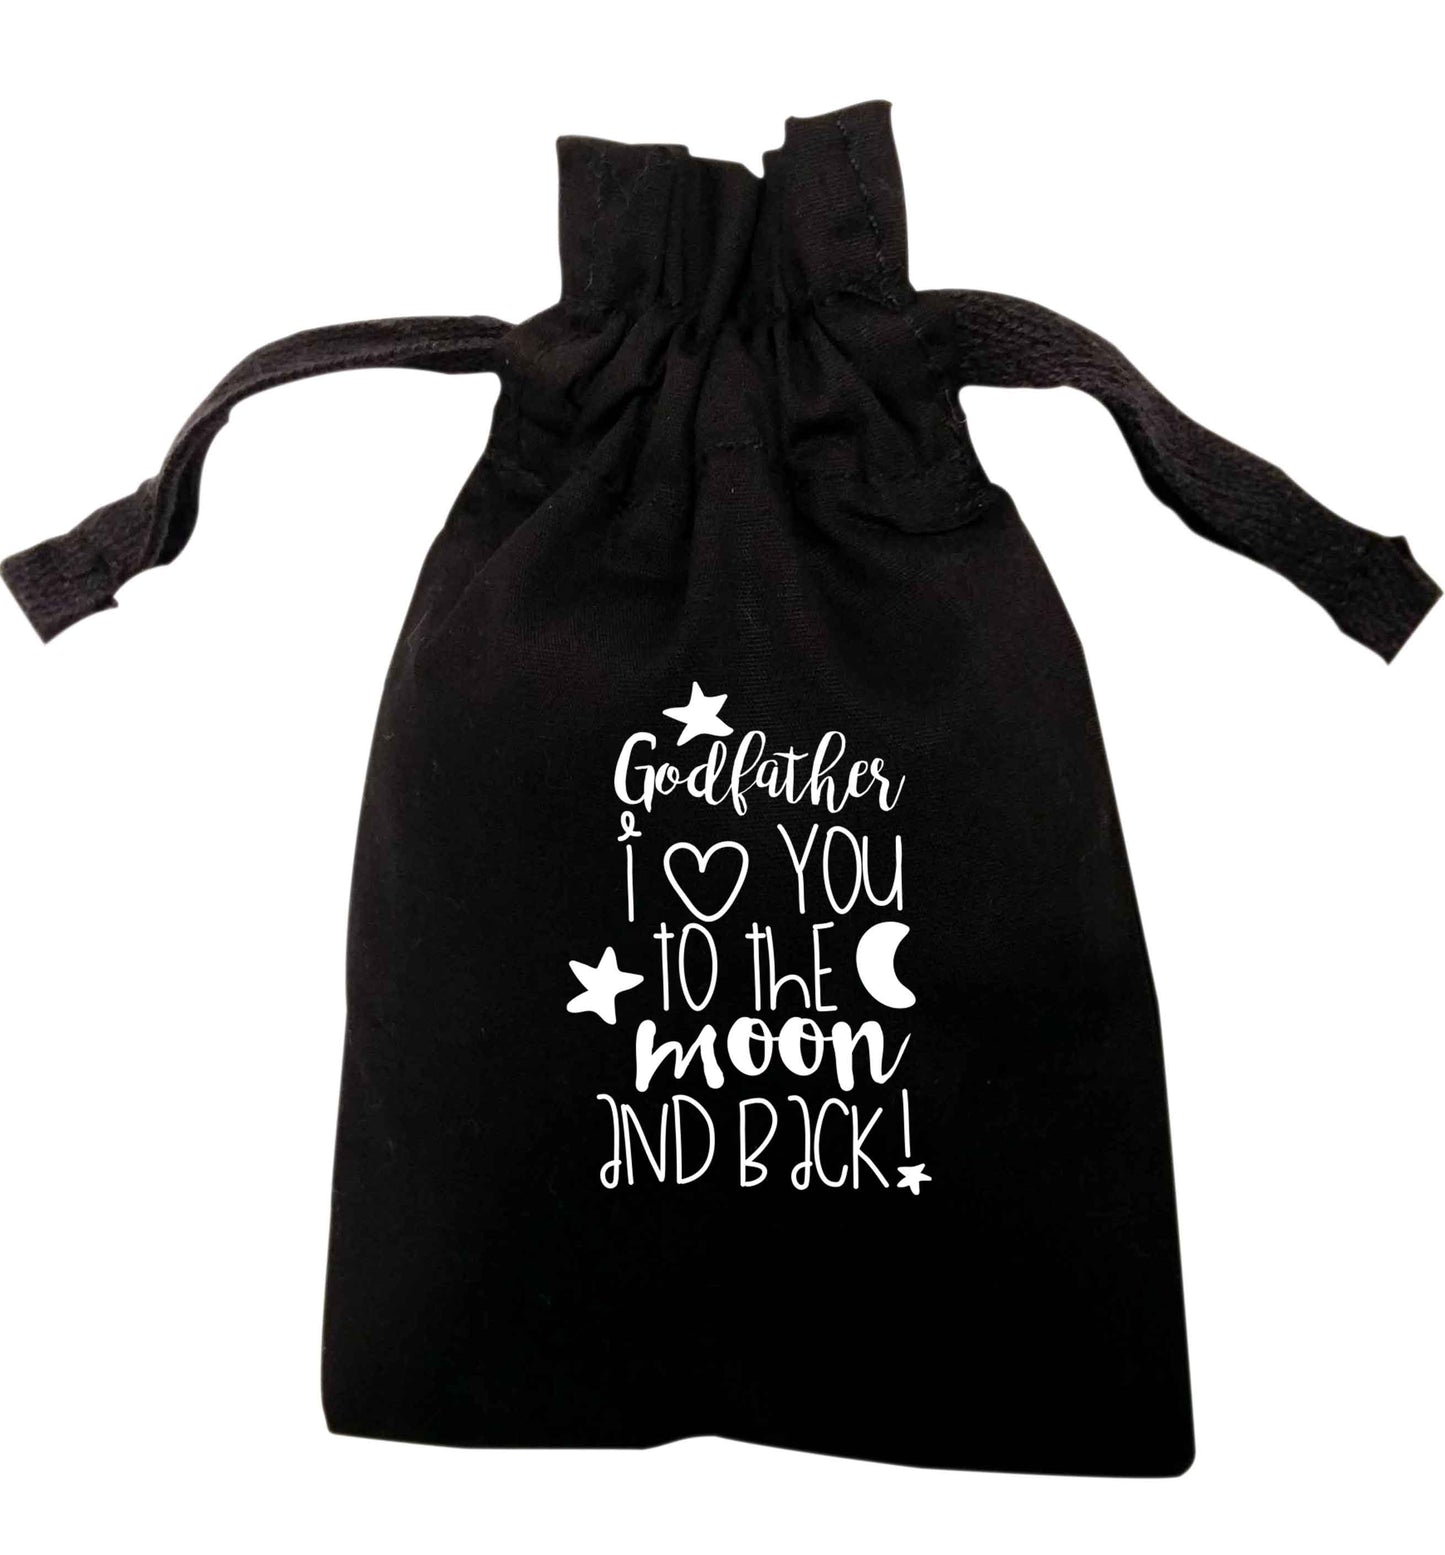 Godfather I love you to the moon and back | XS - L | Pouch / Drawstring bag / Sack | Organic Cotton | Bulk discounts available!